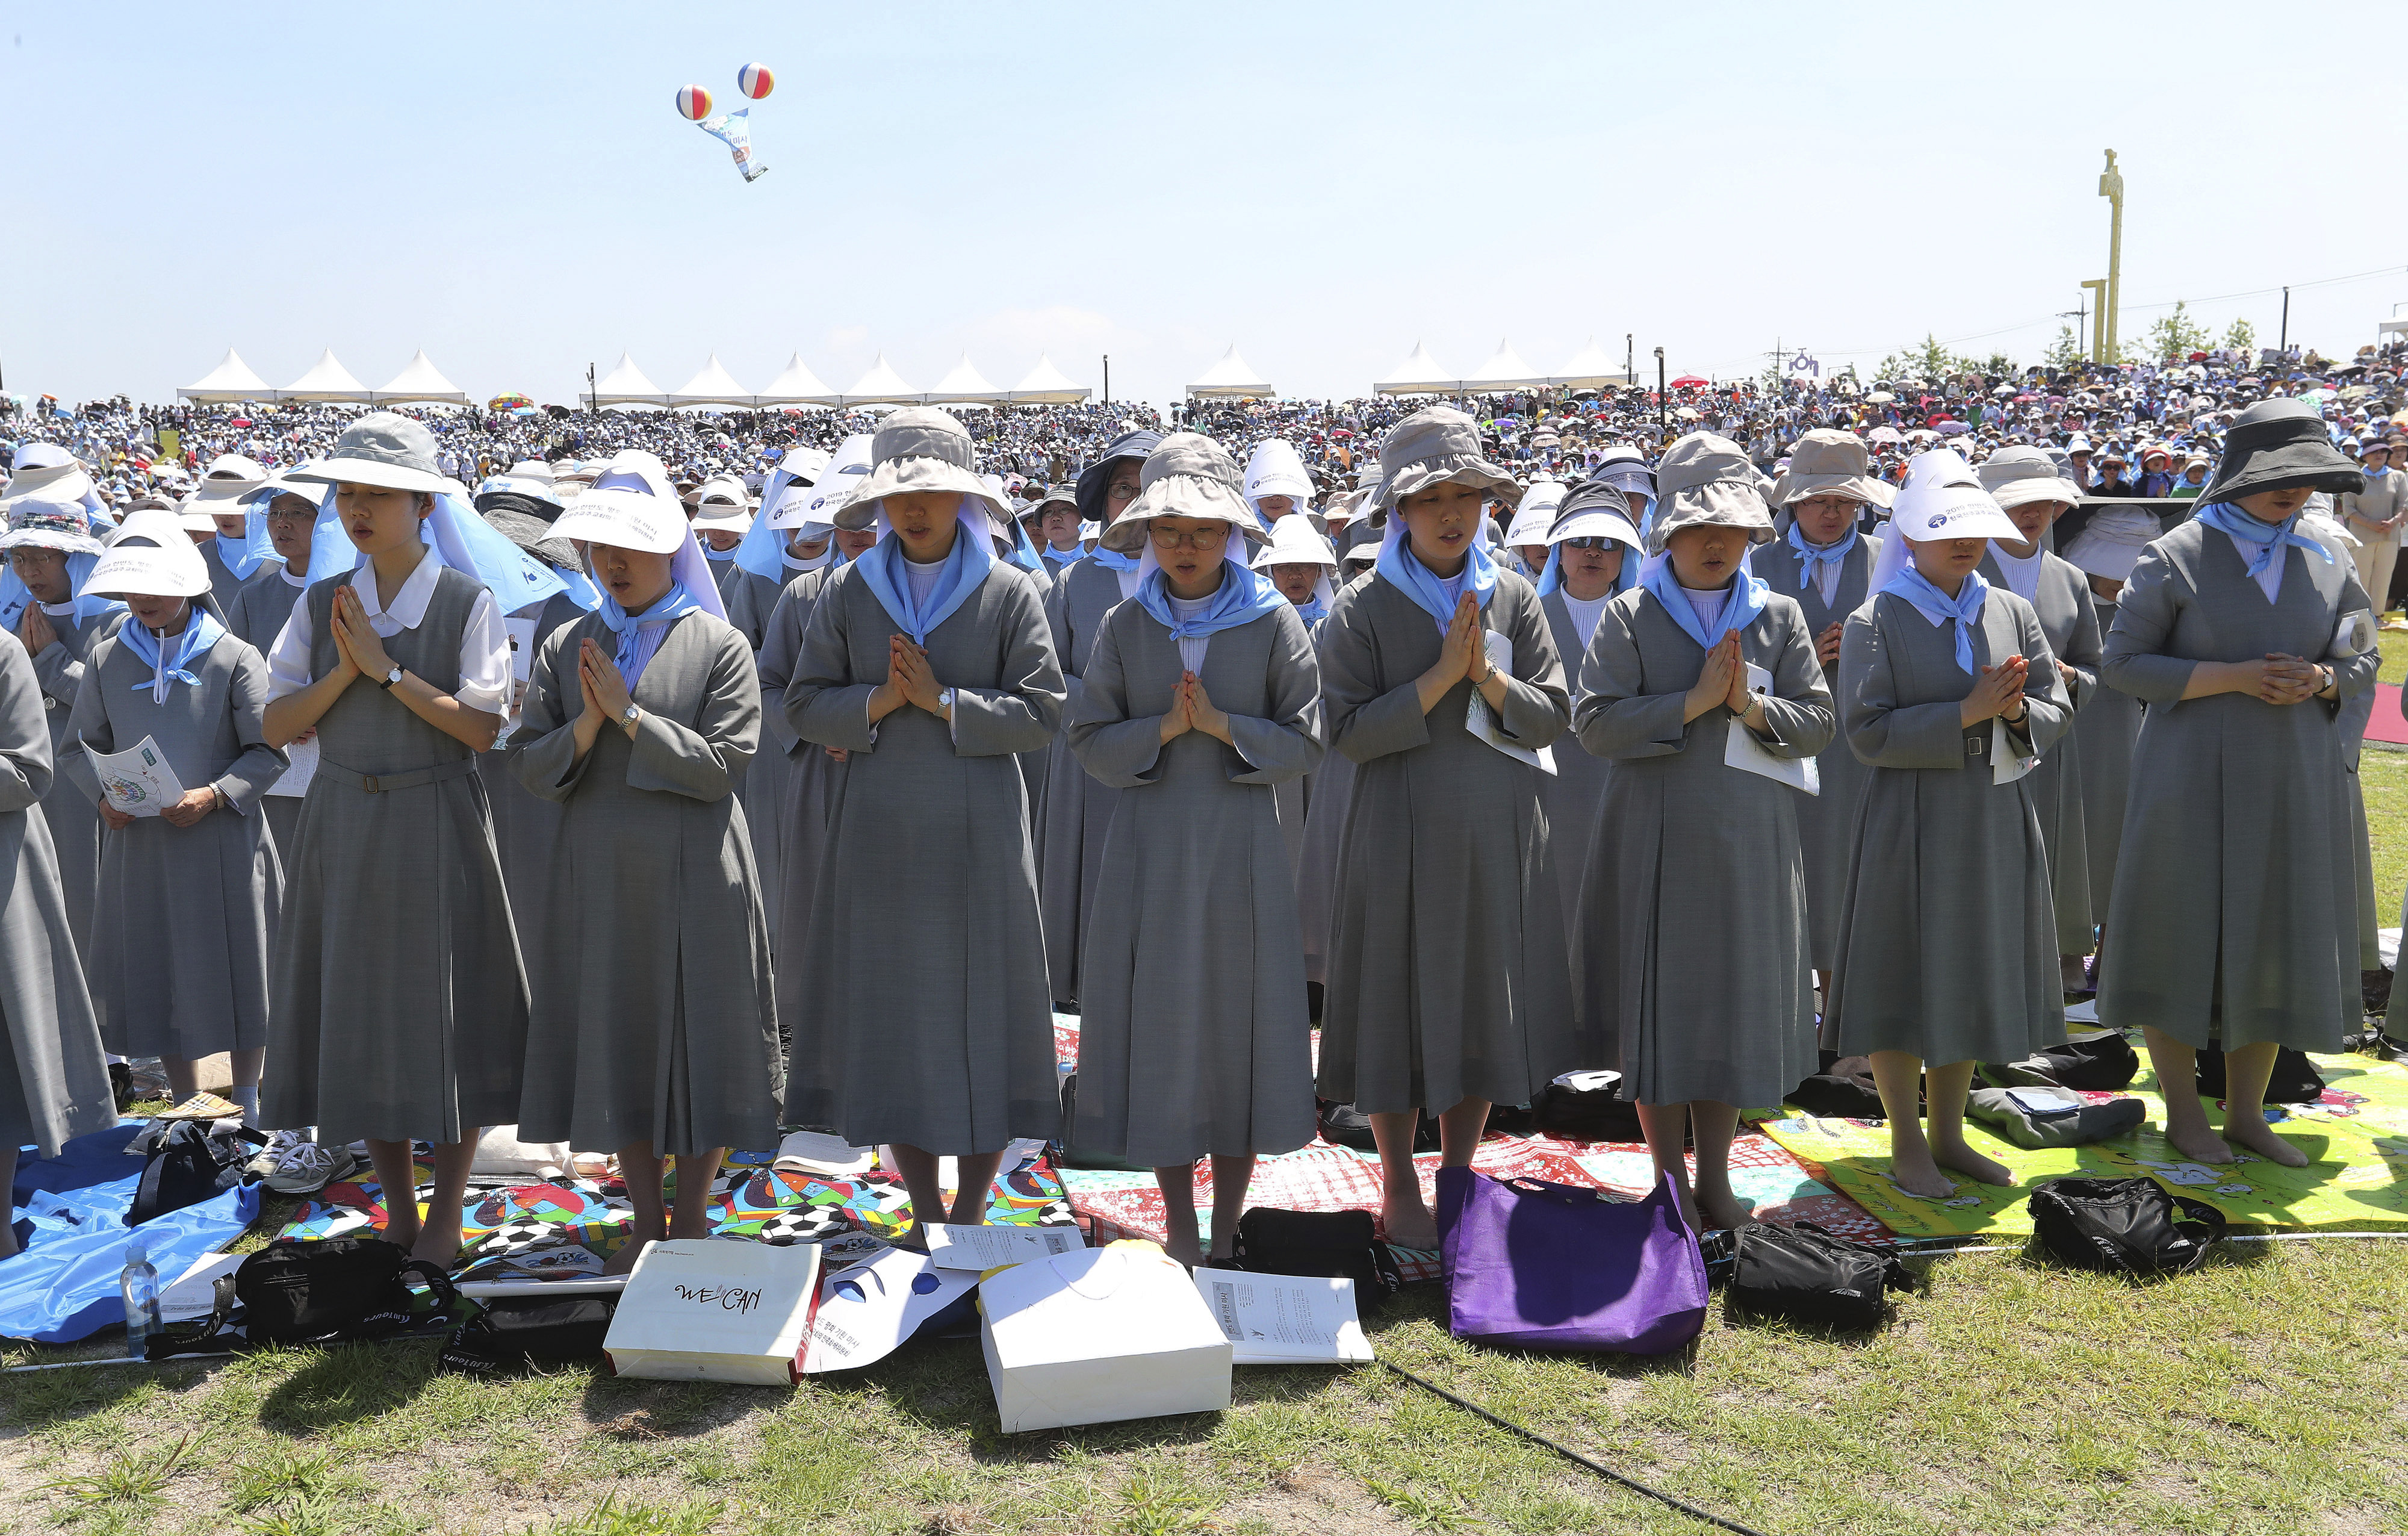 South Korean Catholic nuns pray wishing for peace on the Korean Peninsula during a service to mark the 69th anniversary of the outbreak of the Korean War at the Imjingak Pavilion, near the demilitarized zone of Panmunjom, in Paju, South Korea, Tuesday, June 25, 2019. South Korea and North Korea fought a devastating three-year war in the early 1950s that ended with an armistice, not a peace treaty. (AP Photo/Ahn Young-joon)